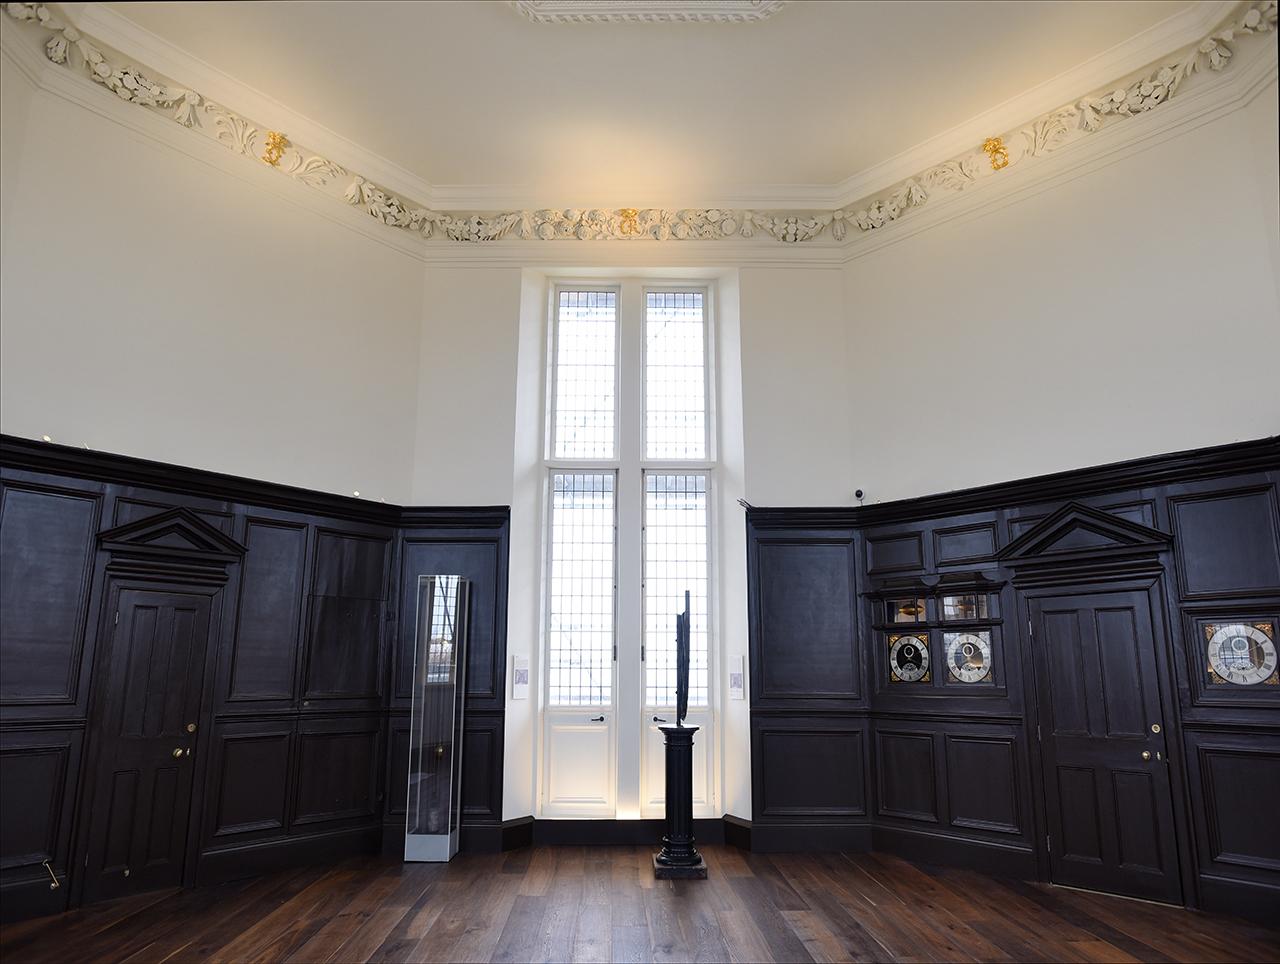 The Octagon Room, an eight-sided wood-panelled room in the Royal Observatory